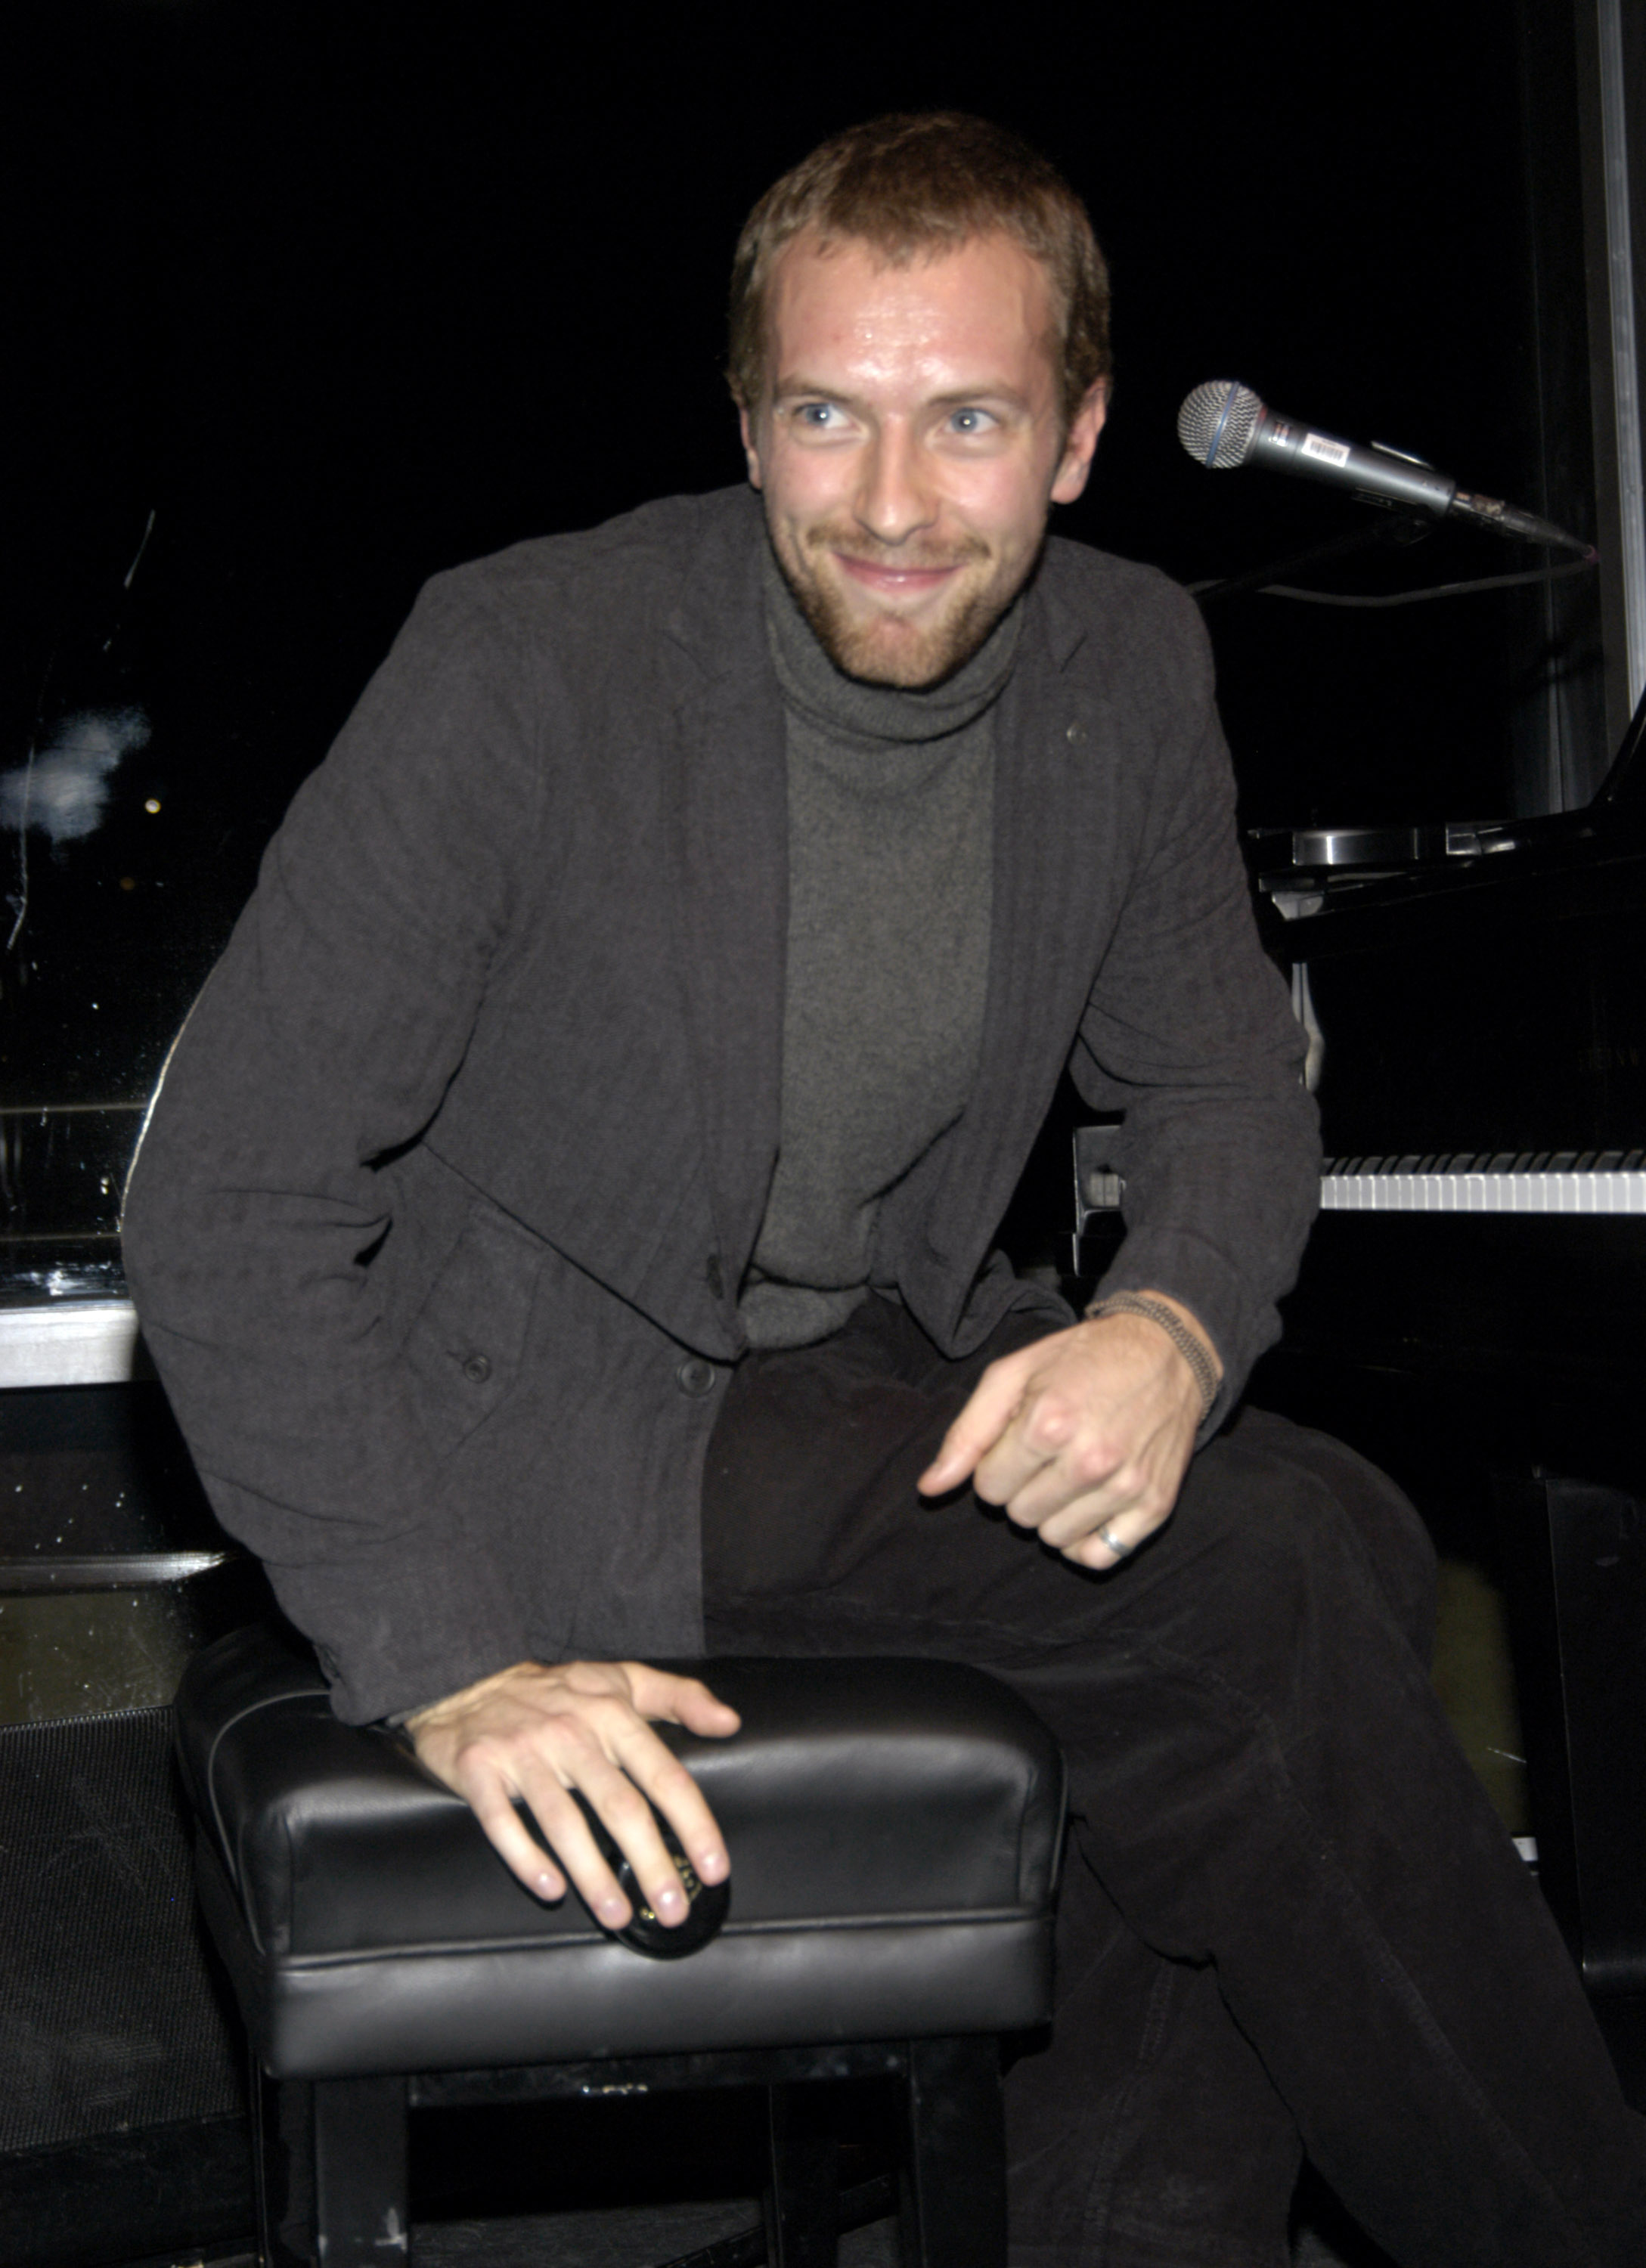 Chris Martin at the Music has Power Awards in 2003 | Source: Getty Images